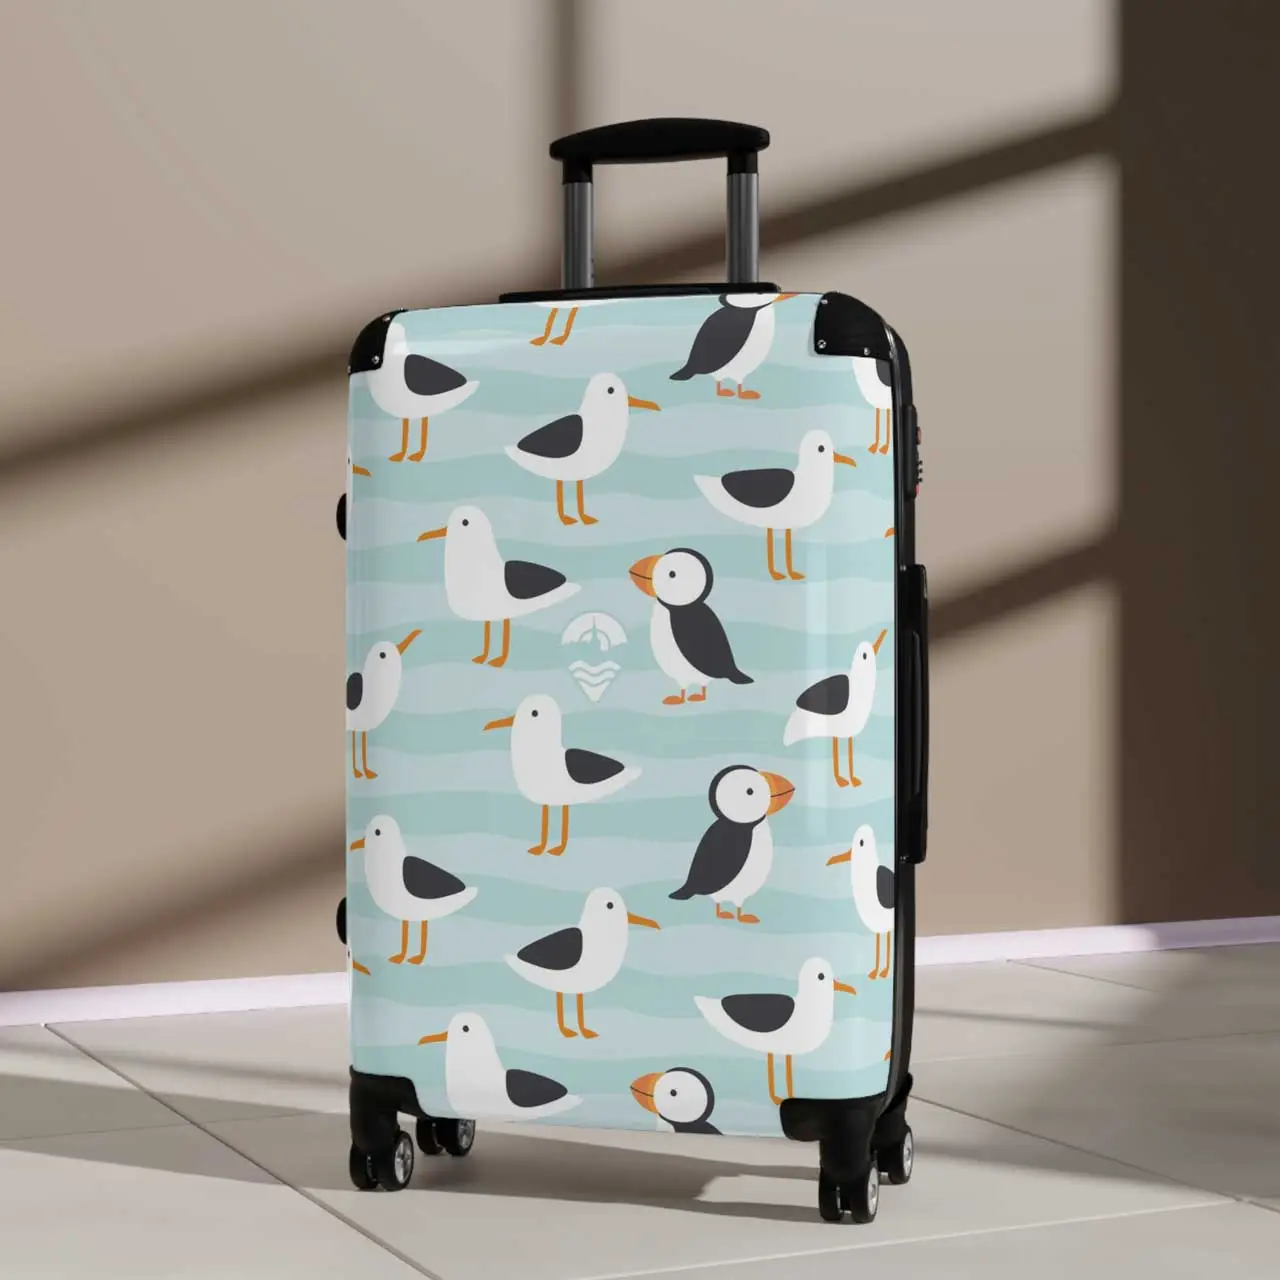 Puffins and Seagulls Travel Cases - Whimsical Pattern Luggage for Tenby Enthusiasts